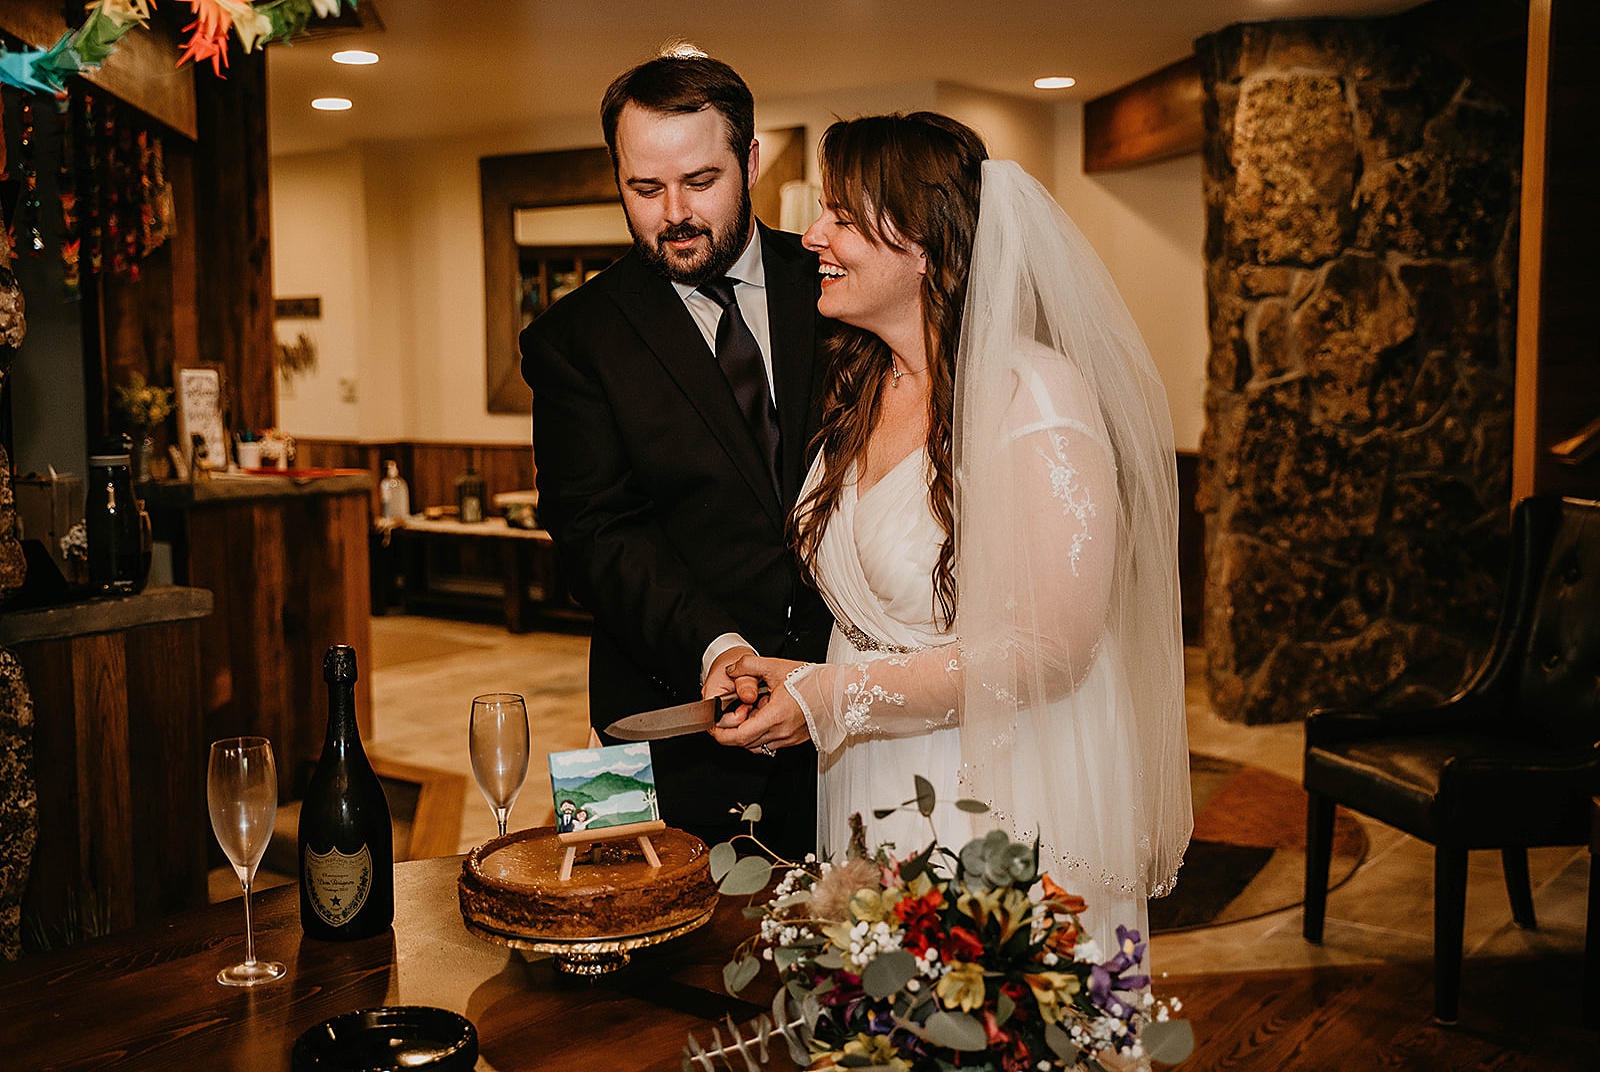 Rustic Colorado Elopement Reception Cake Cutting by Krystal Capone Photography